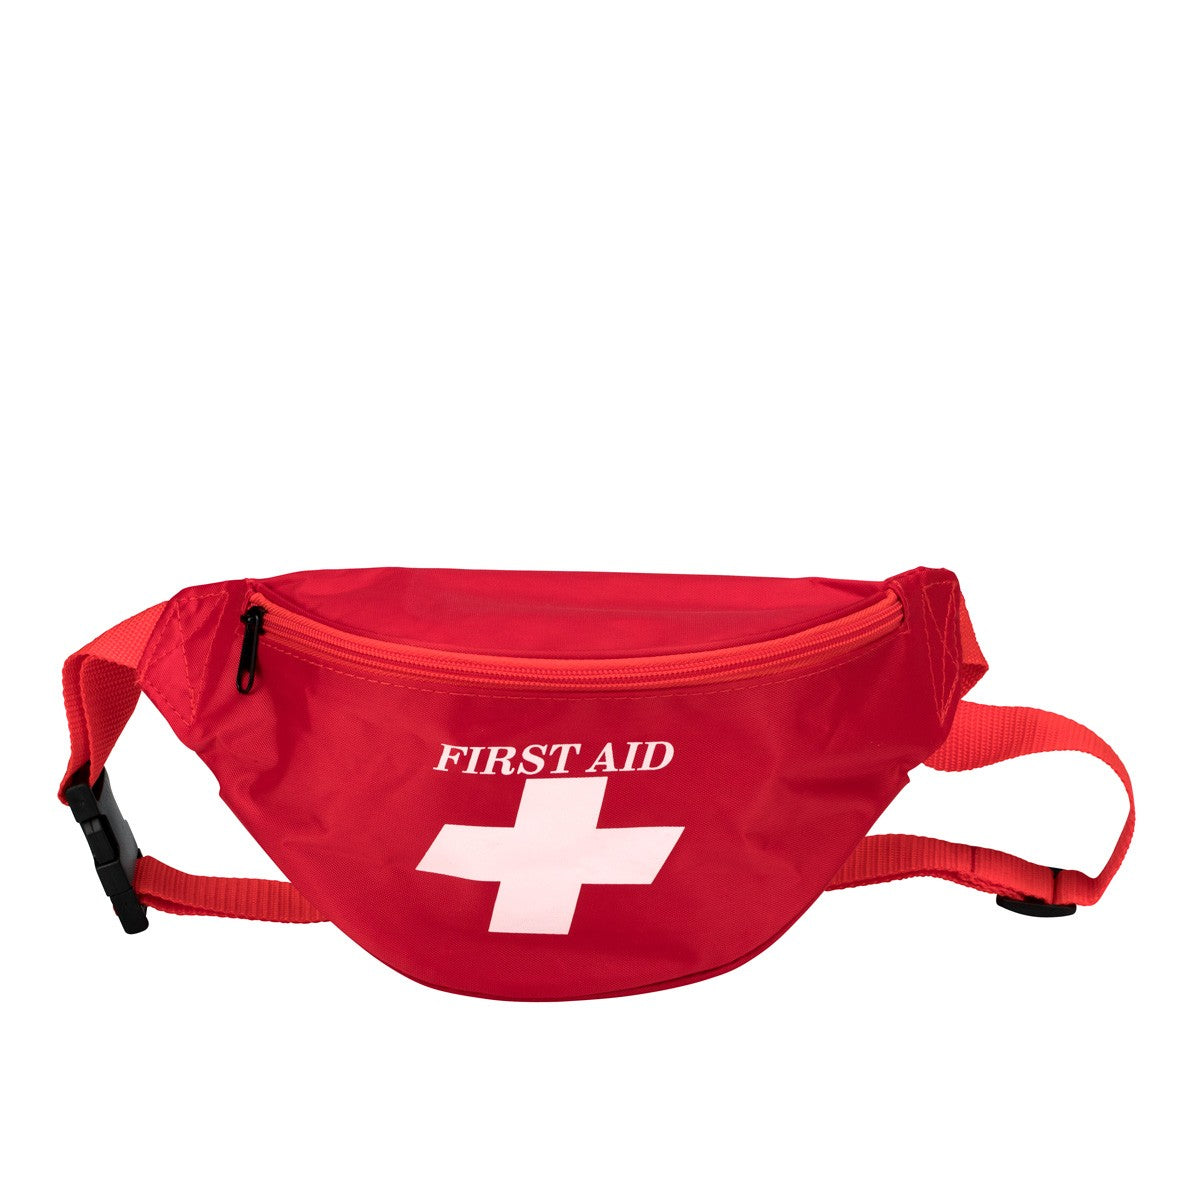 First Aid Kit Fanny Pack, Fabric Case - W-30500